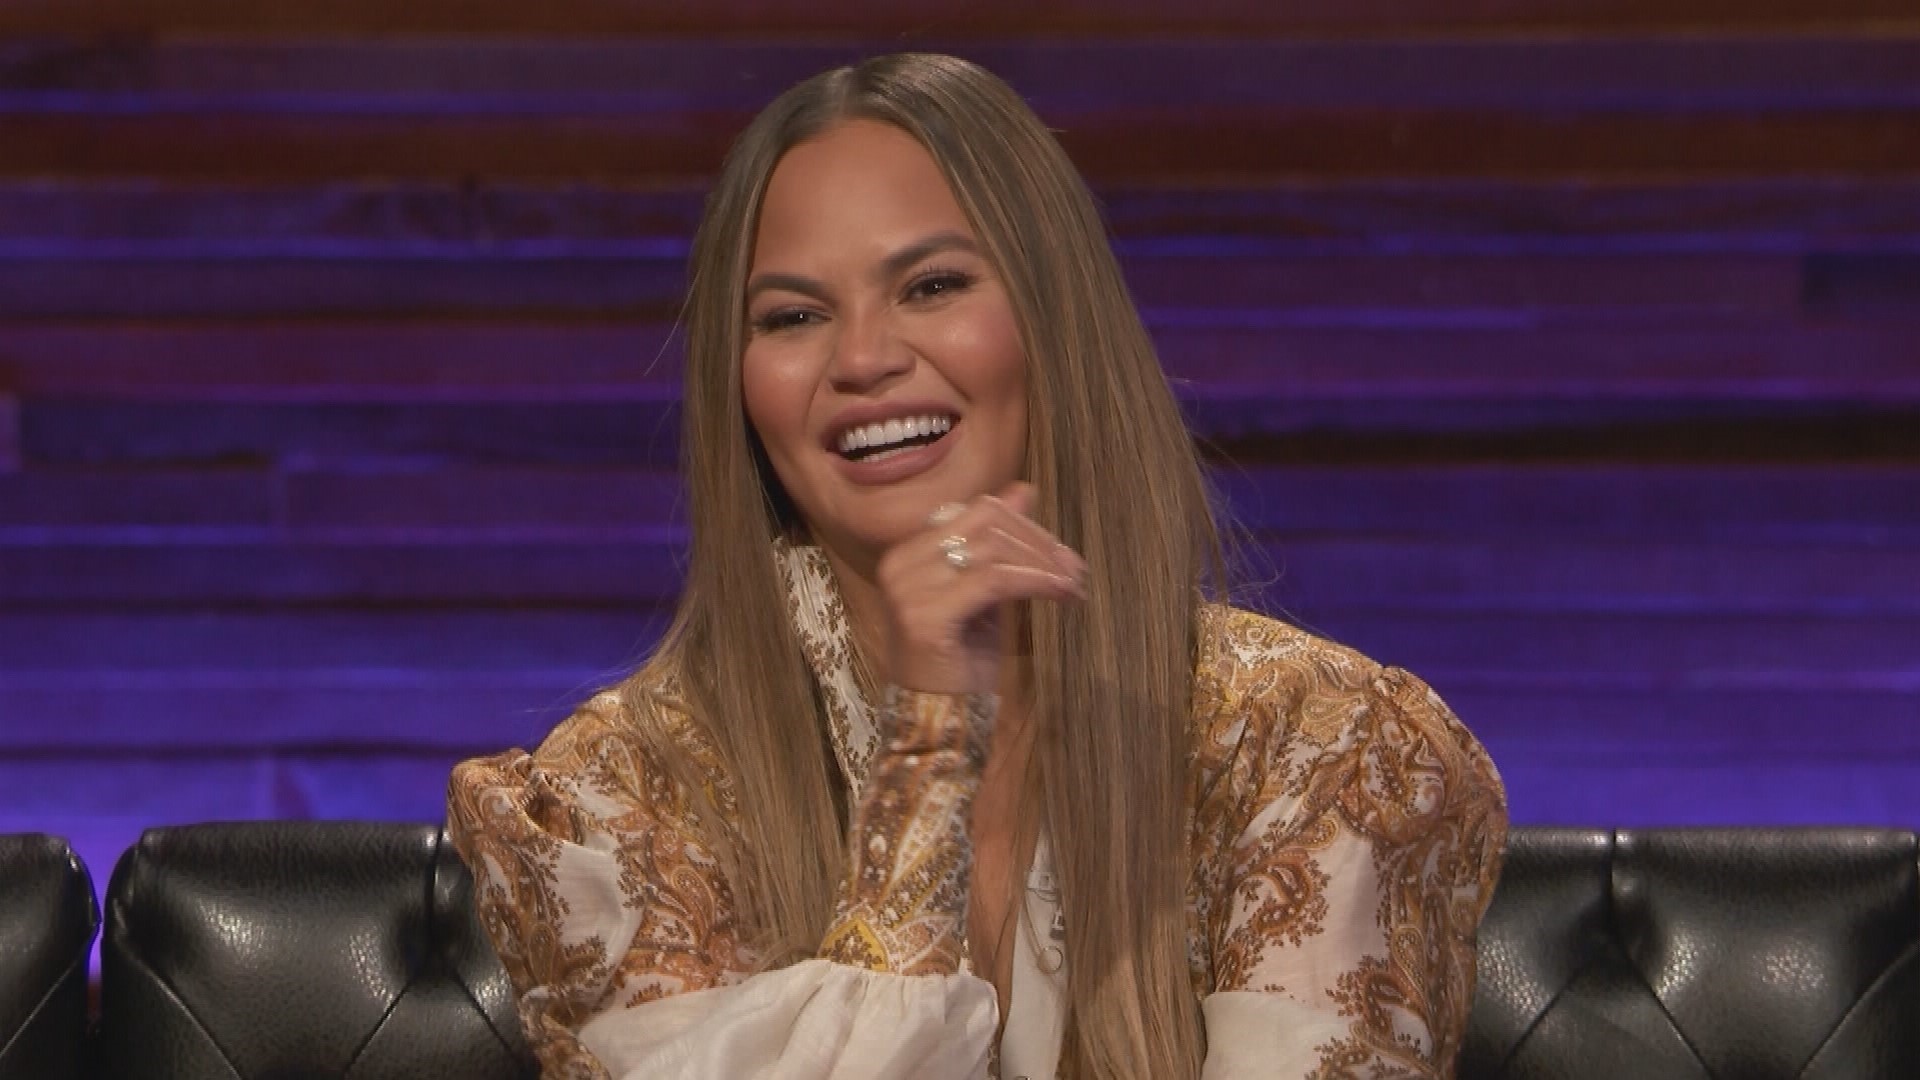 Chrissy Teigen first honed her performance skills as a cheerleader at Snohomish High School. Travel and accommodation provided by NBC.